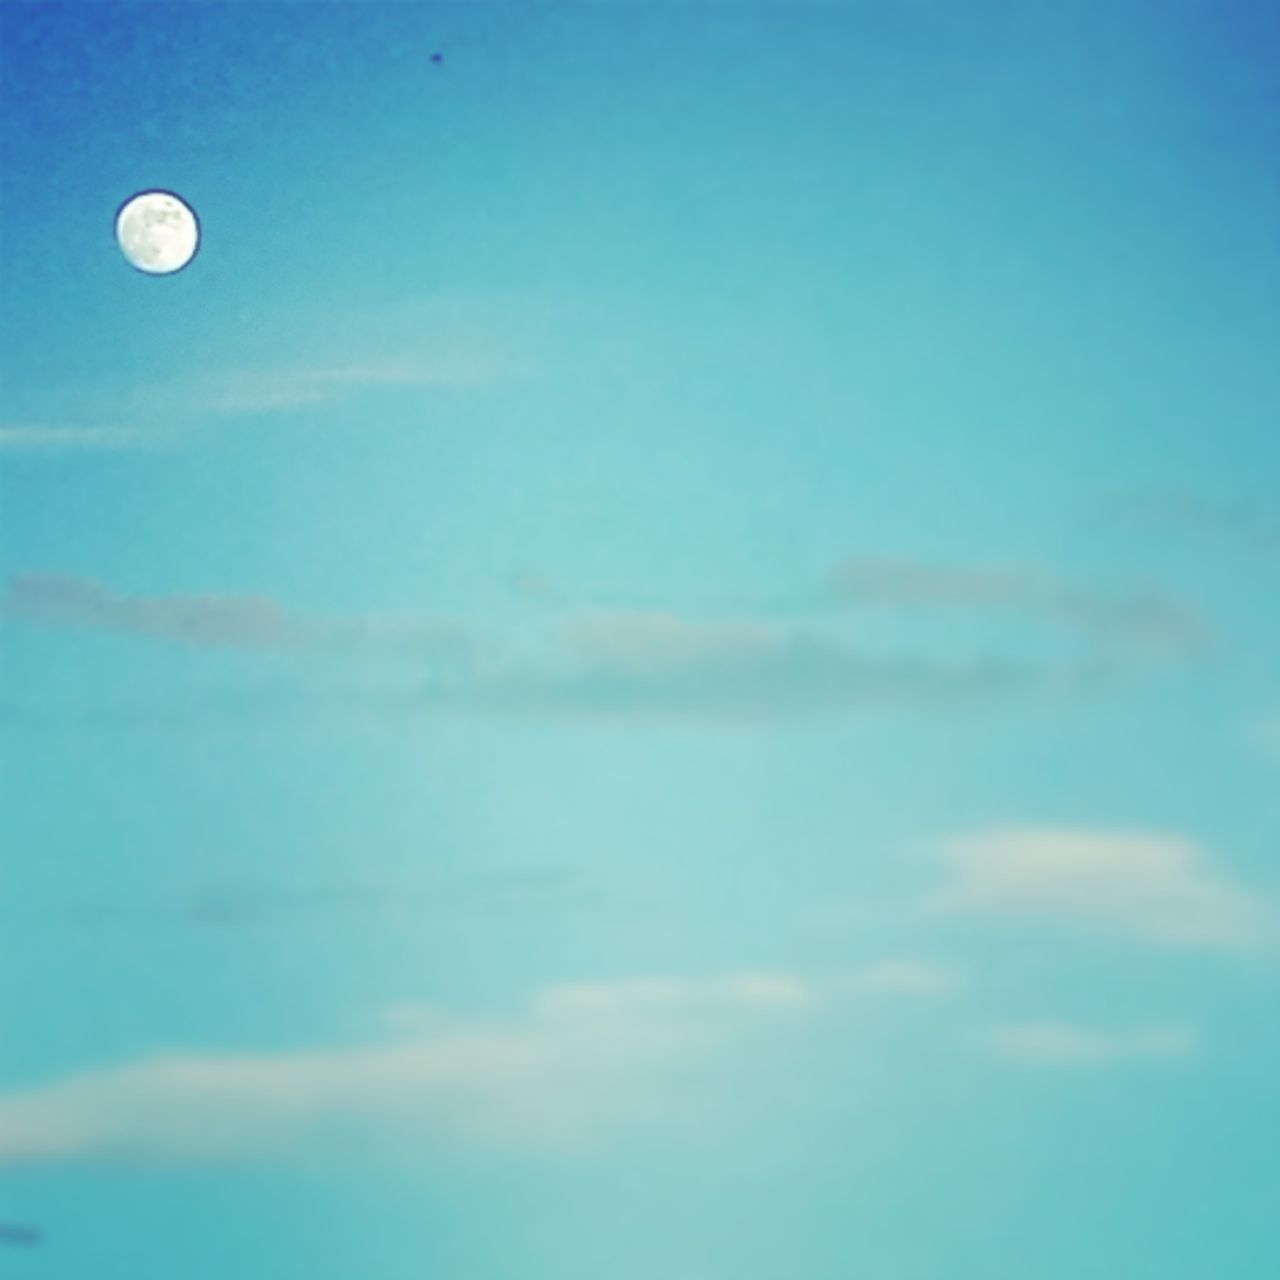 low angle view, moon, blue, sky, beauty in nature, sky only, scenics, nature, astronomy, full moon, tranquility, cloud - sky, space exploration, planetary moon, tranquil scene, circle, outdoors, idyllic, copy space, cloud